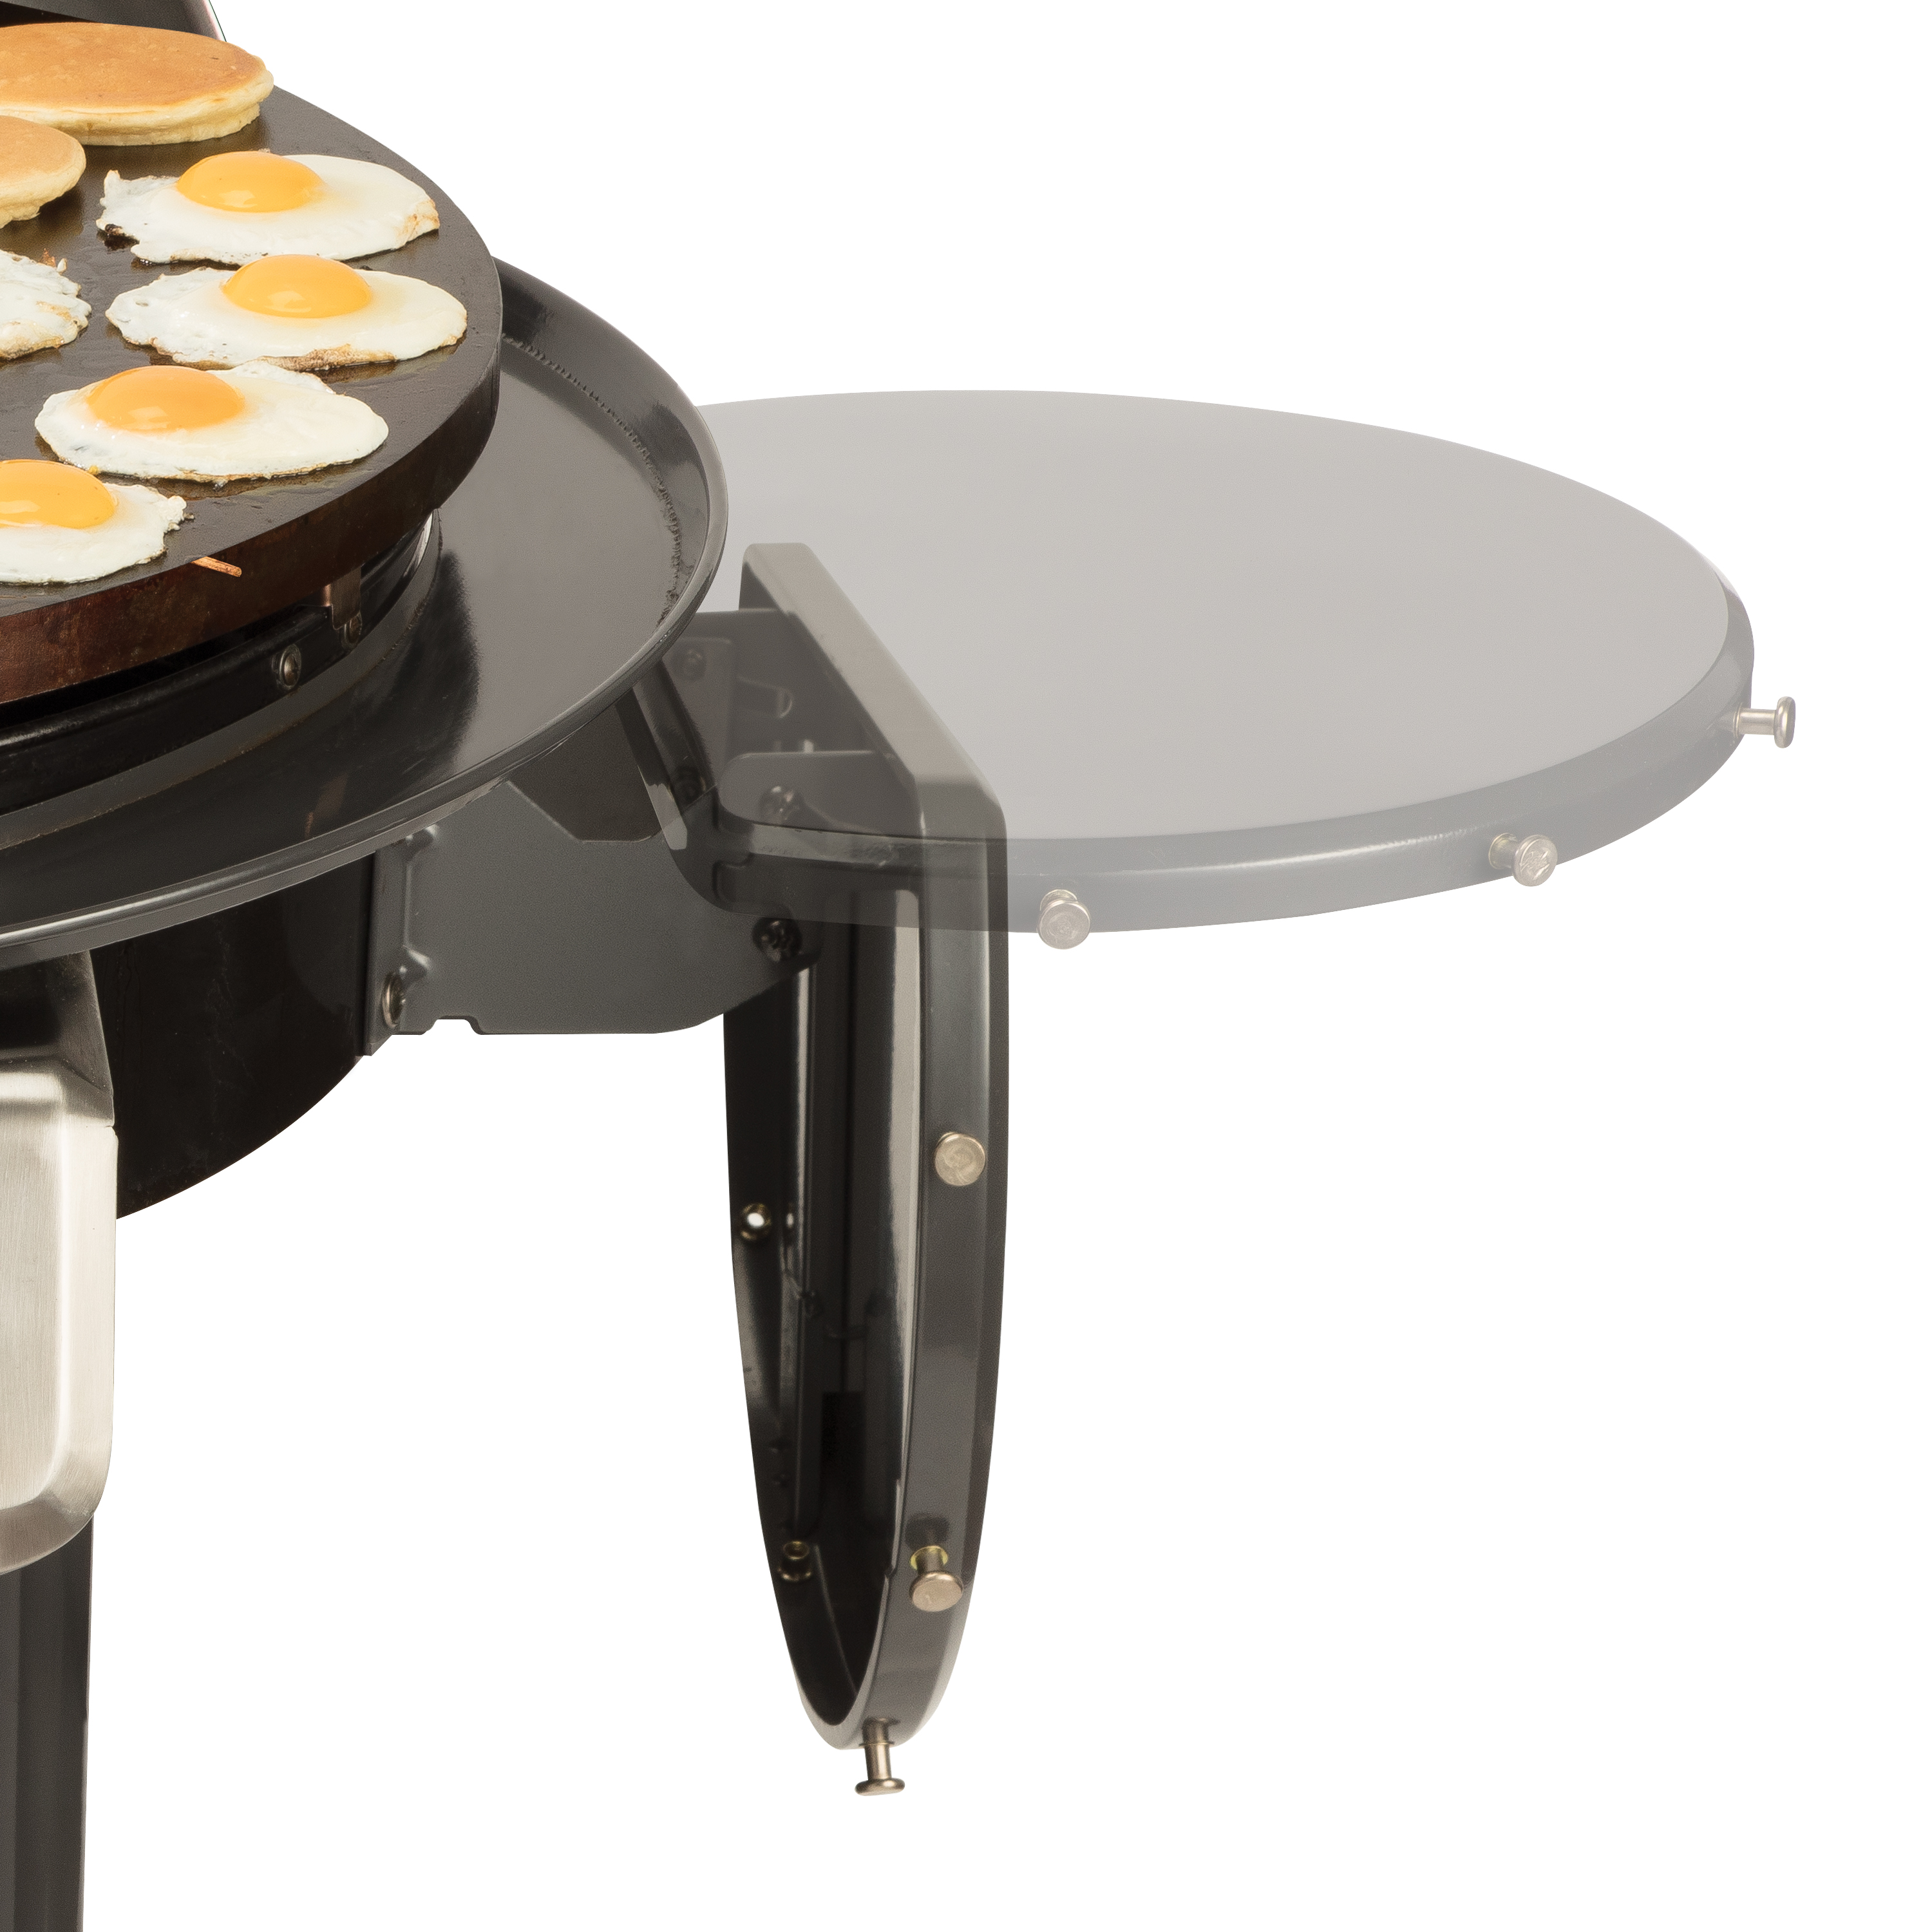 Cuisinart 30-Inch Round Flat Top Surface Outdoor, 360° XL Griddle Cooking Station - image 3 of 3